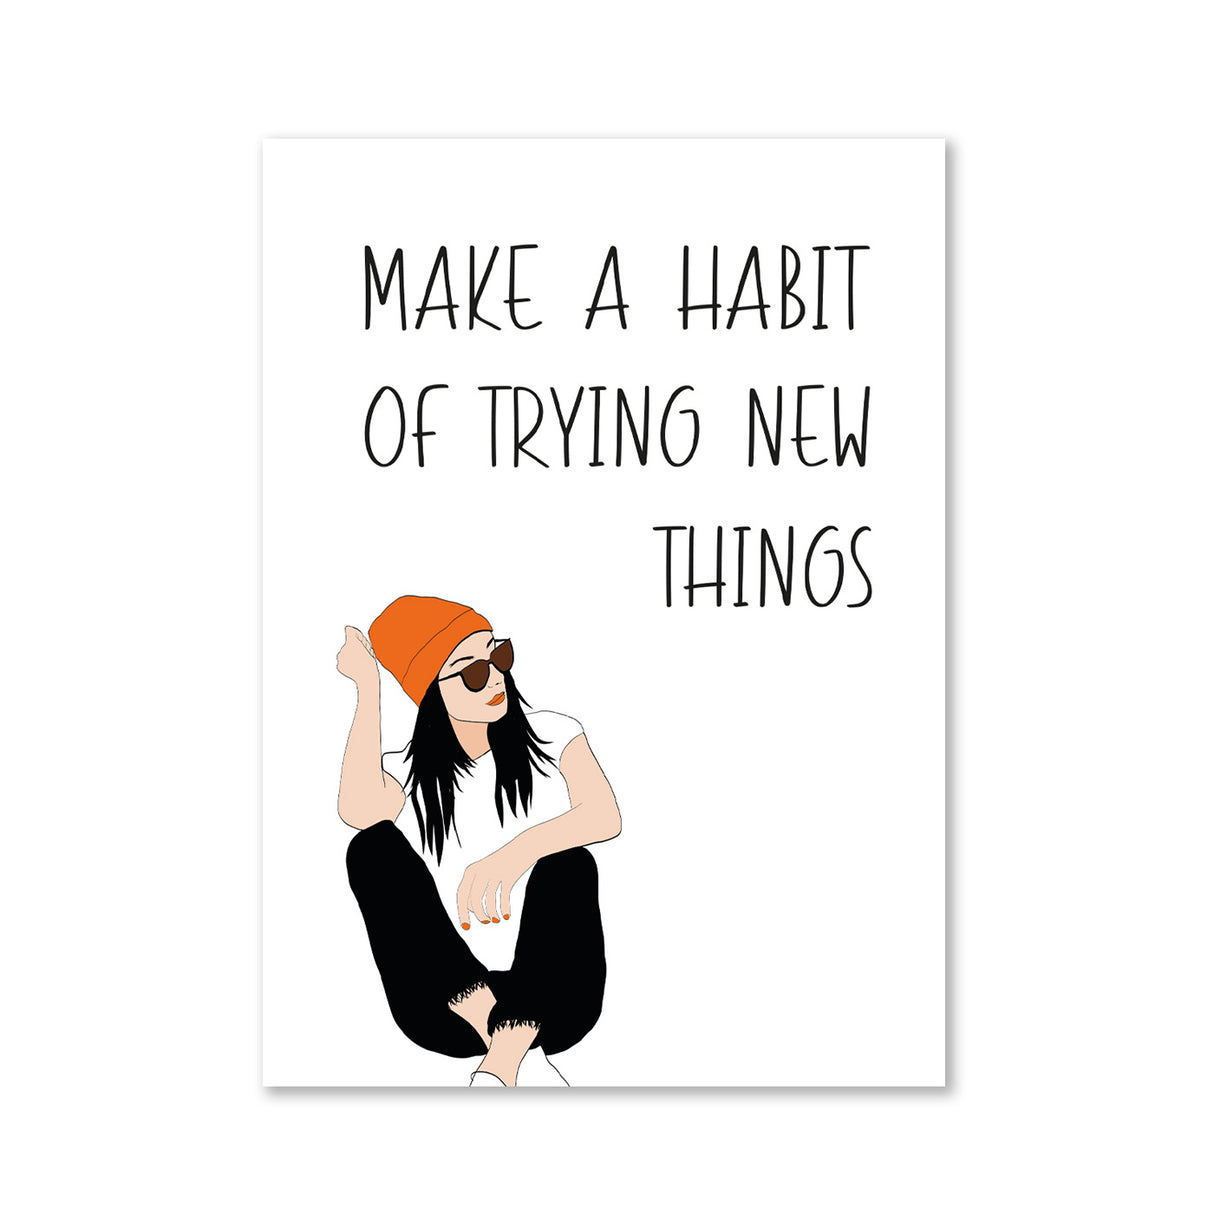 Make a habit of trying new things - Magnet